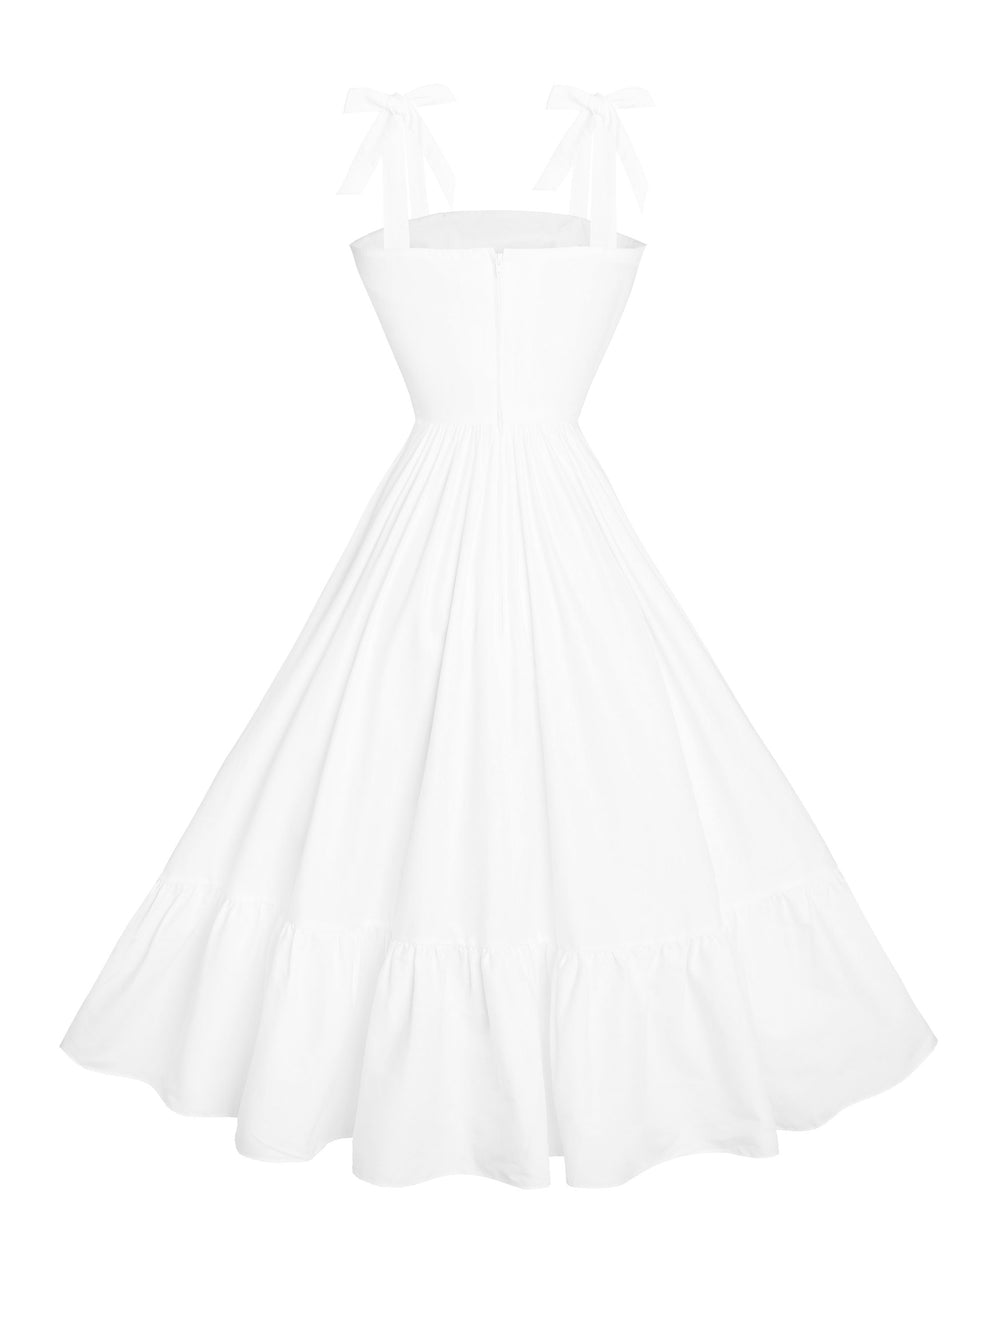 RTS - Size S - Chelsea Dress in White Cotton